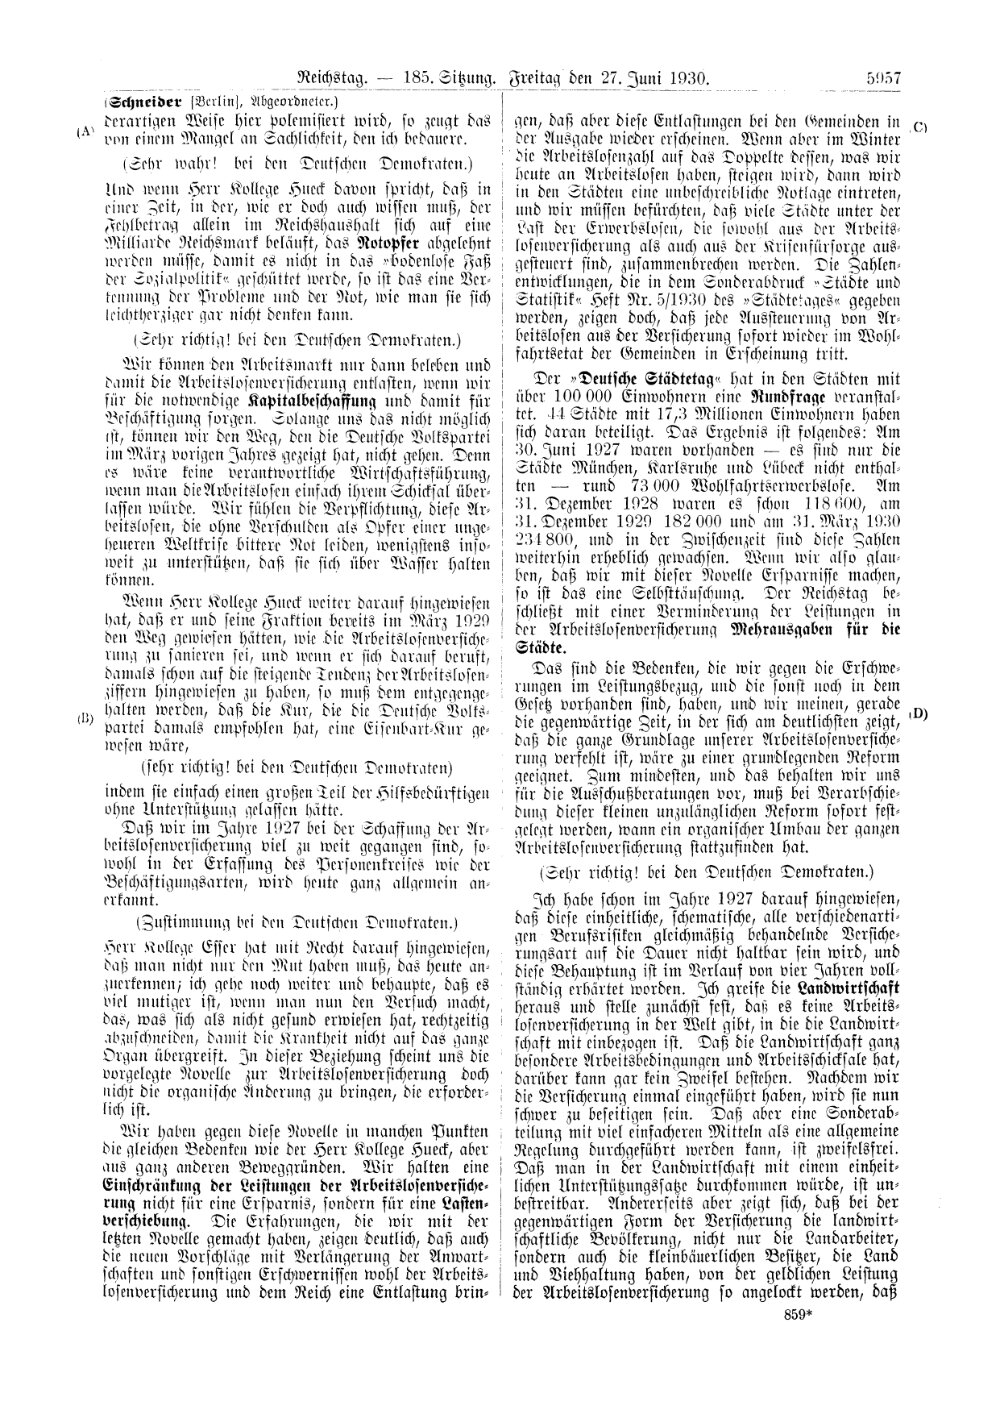 Scan of page 5957